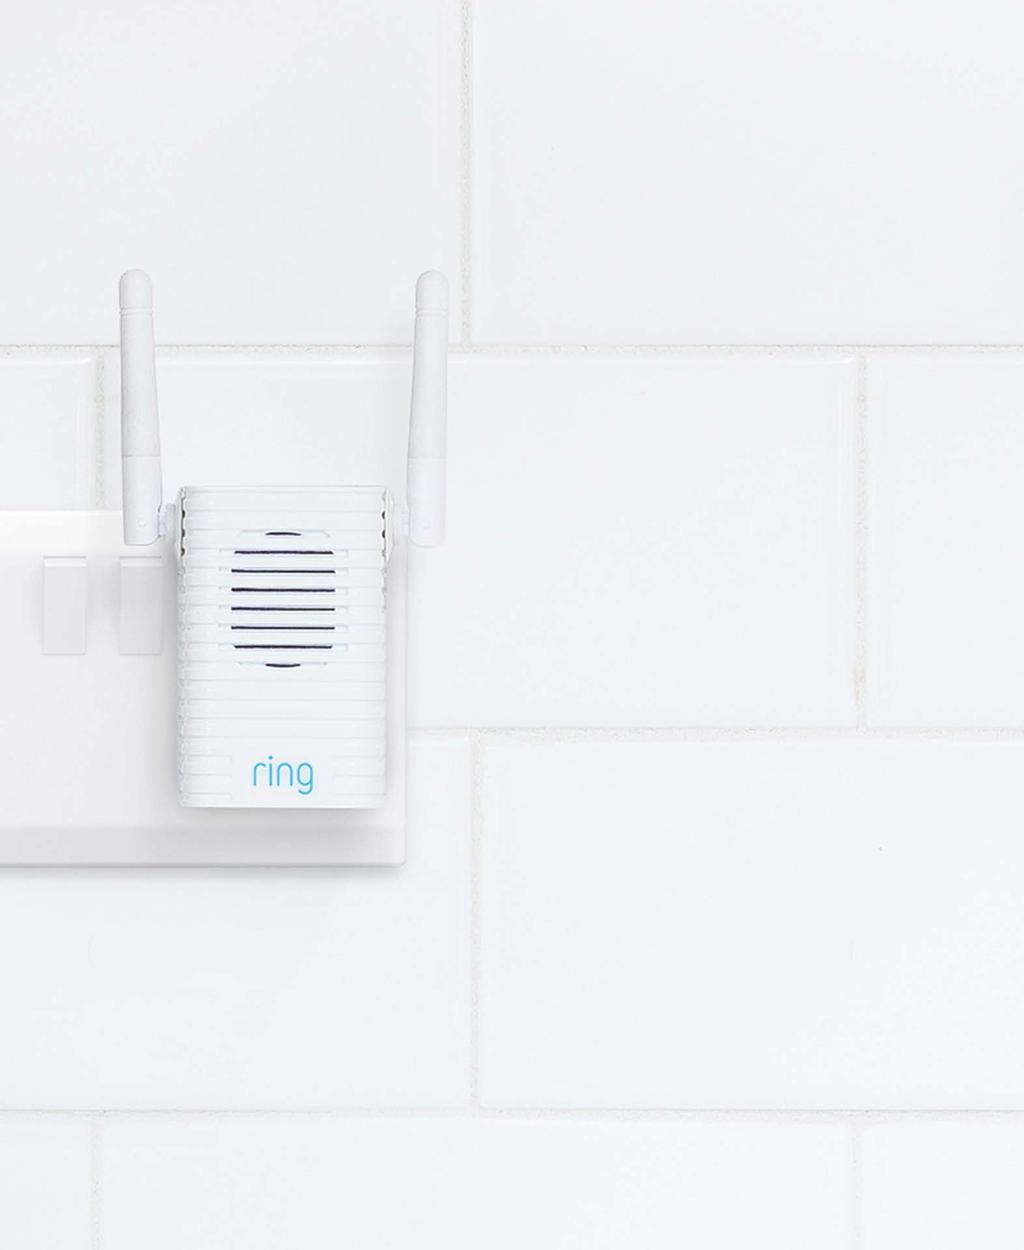 Plug in your Chime Pro It serves as a Wi-Fi extender for your Ring Doorbell Pro, so set Chime Pro up first.